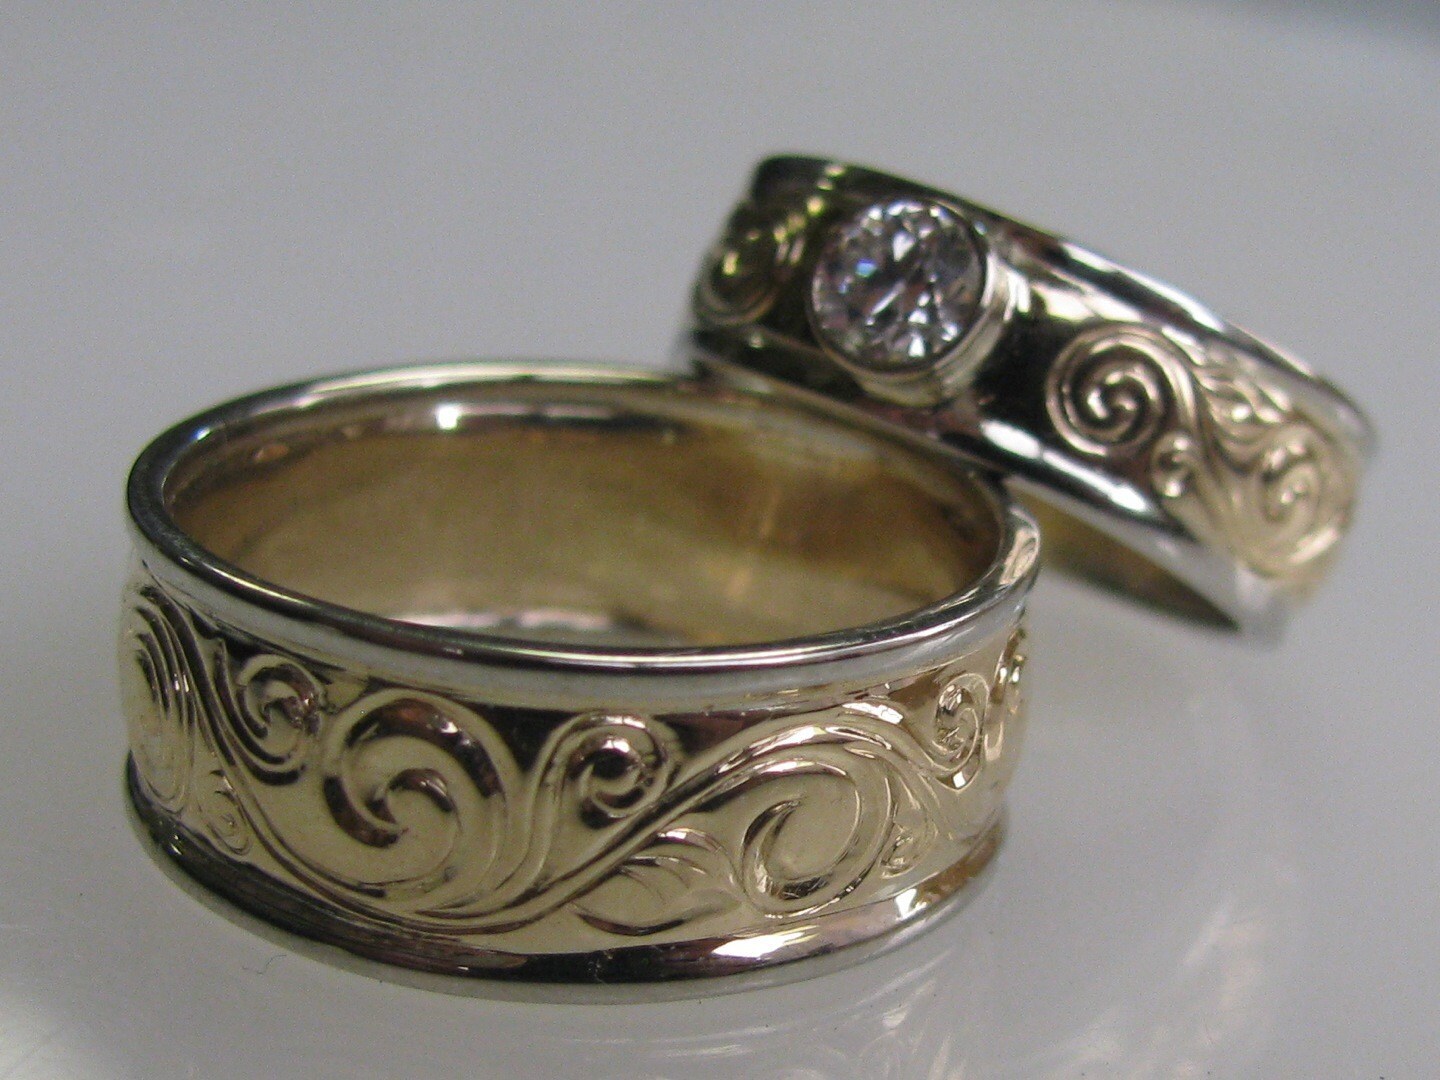 Two Tone Wedding Set With Fine Hand Engraving Made to Order - Etsy